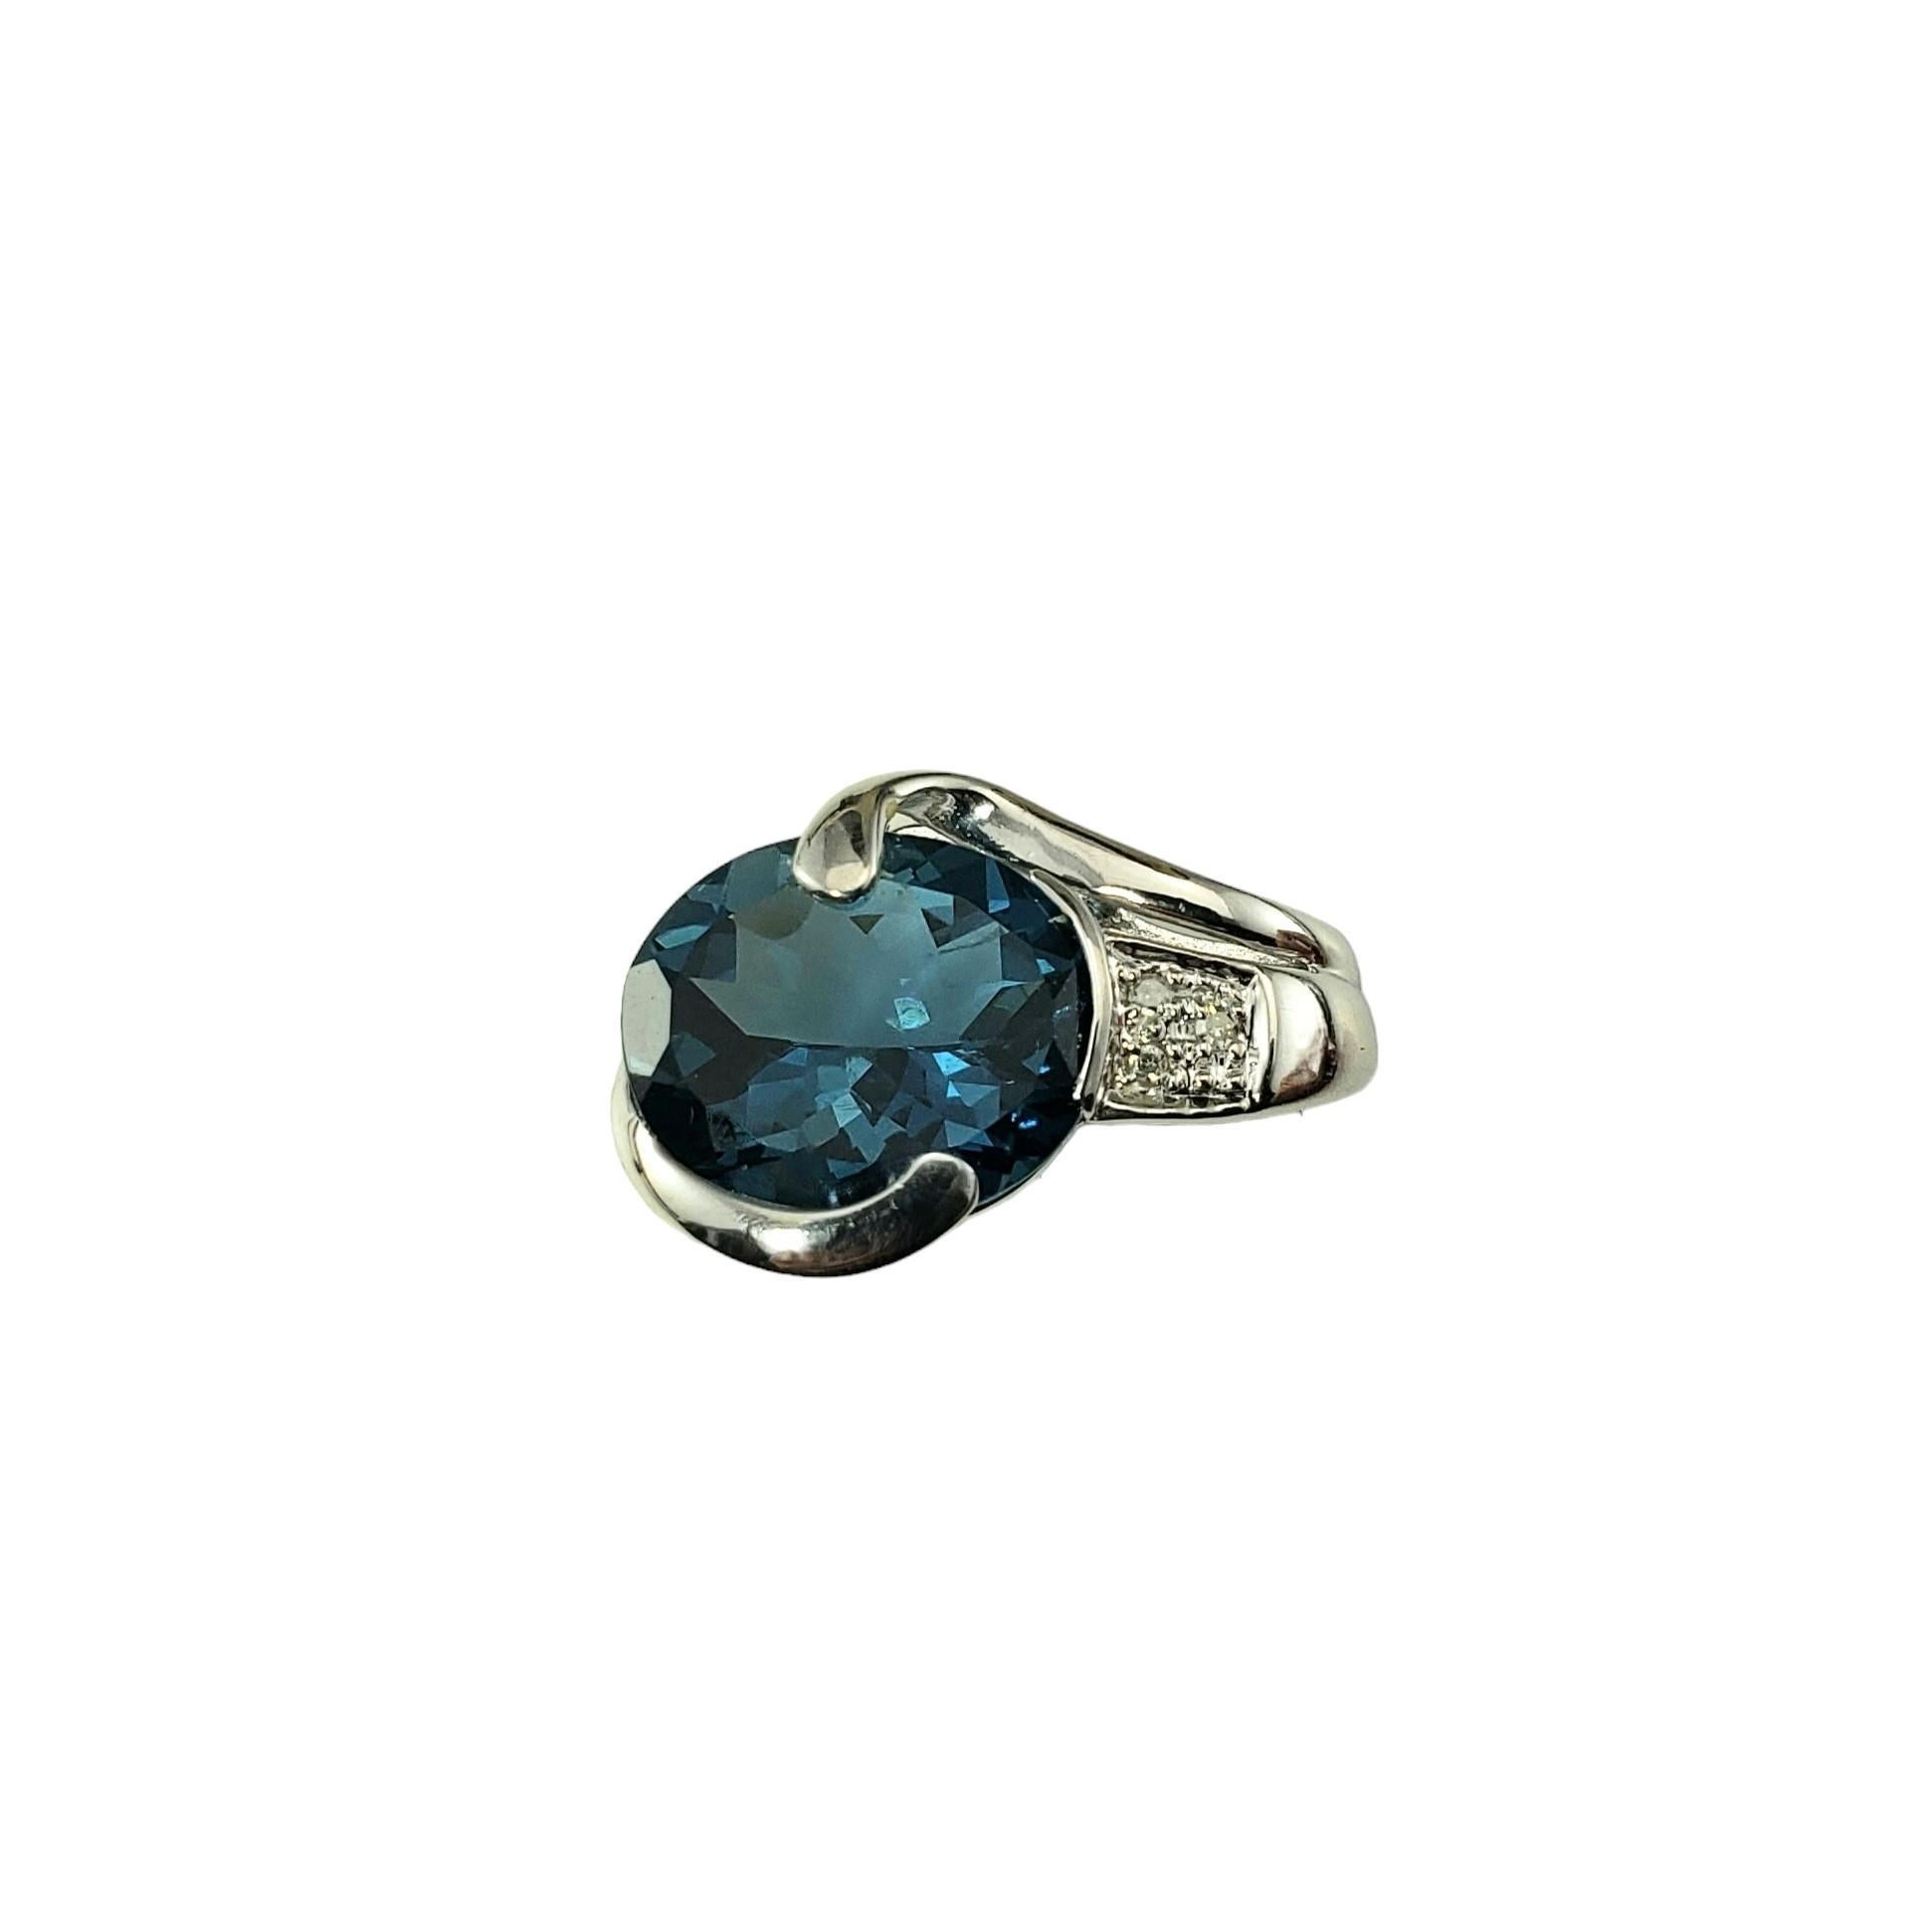 14K White Gold London Blue Topaz and Diamond Pendant JAGi Certified

This elegant pendant features one oval cut blue topaz (11.9 mm x 10.7 mm) and three round single cut diamonds set in classic 14K white gold.

Topaz weight: 5.52 ct.

Total diamond